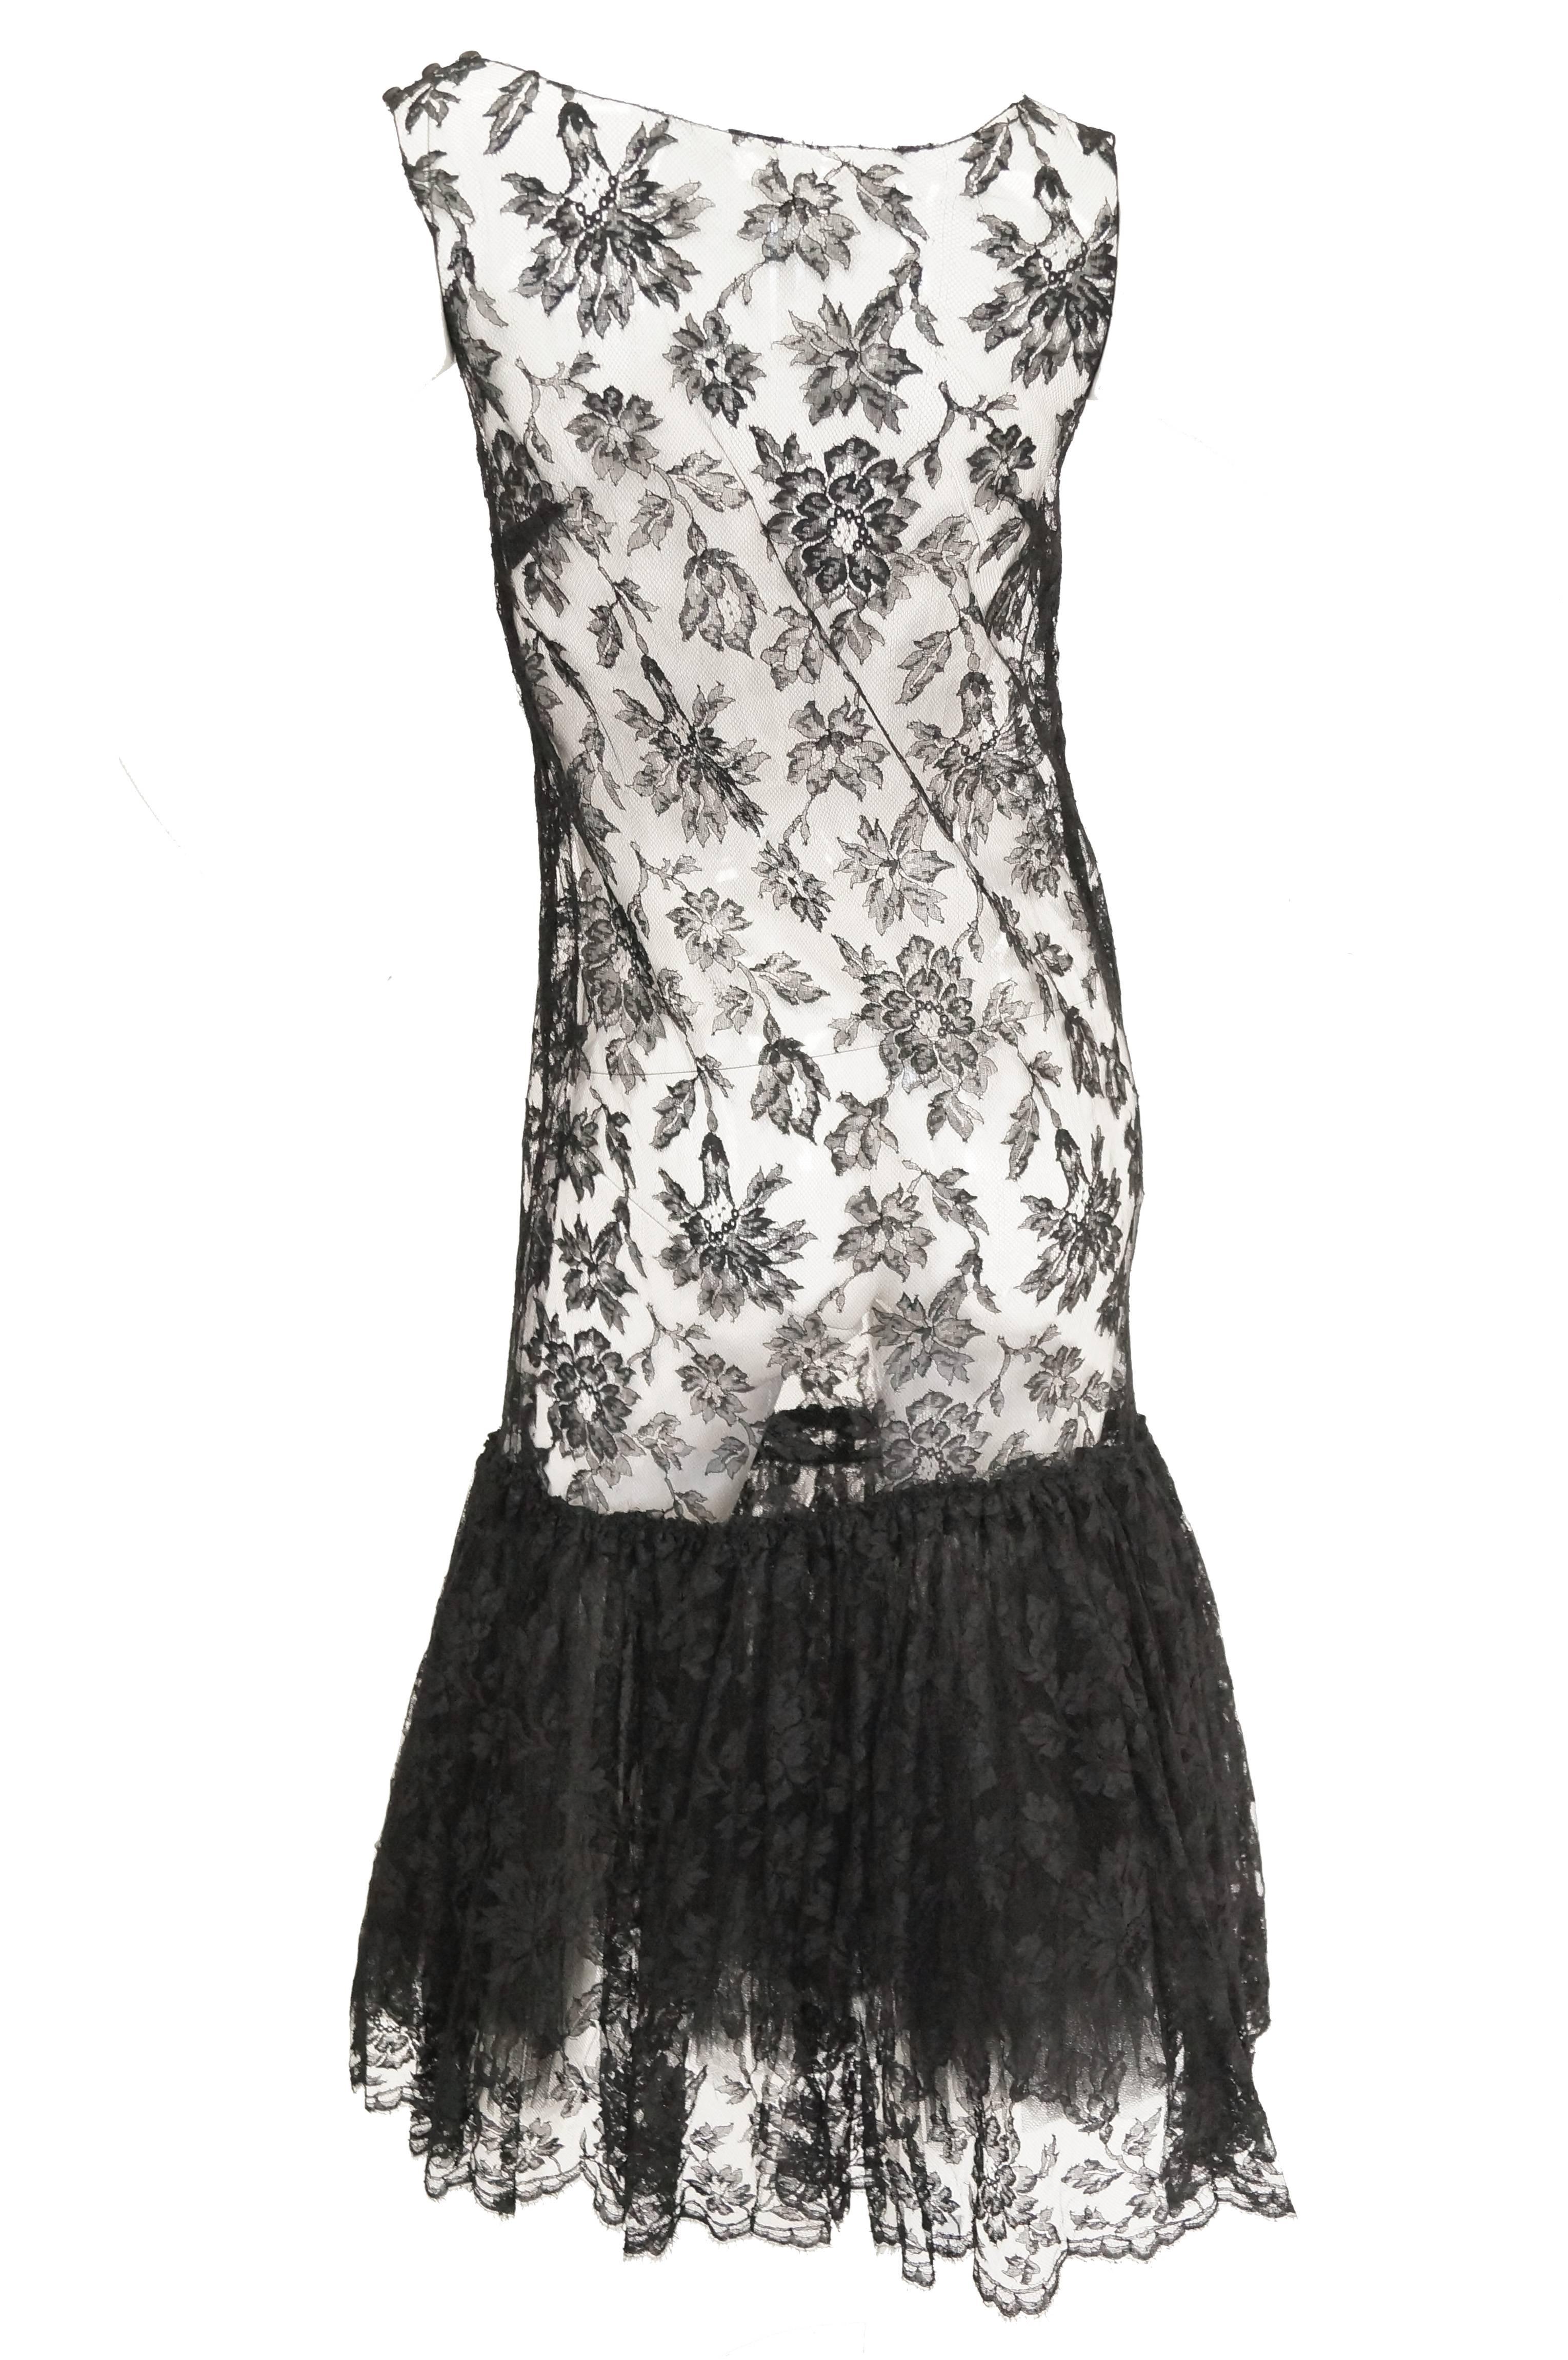 Sheer Black Lace Fluted Ruffle Dress, 1920s  For Sale 1